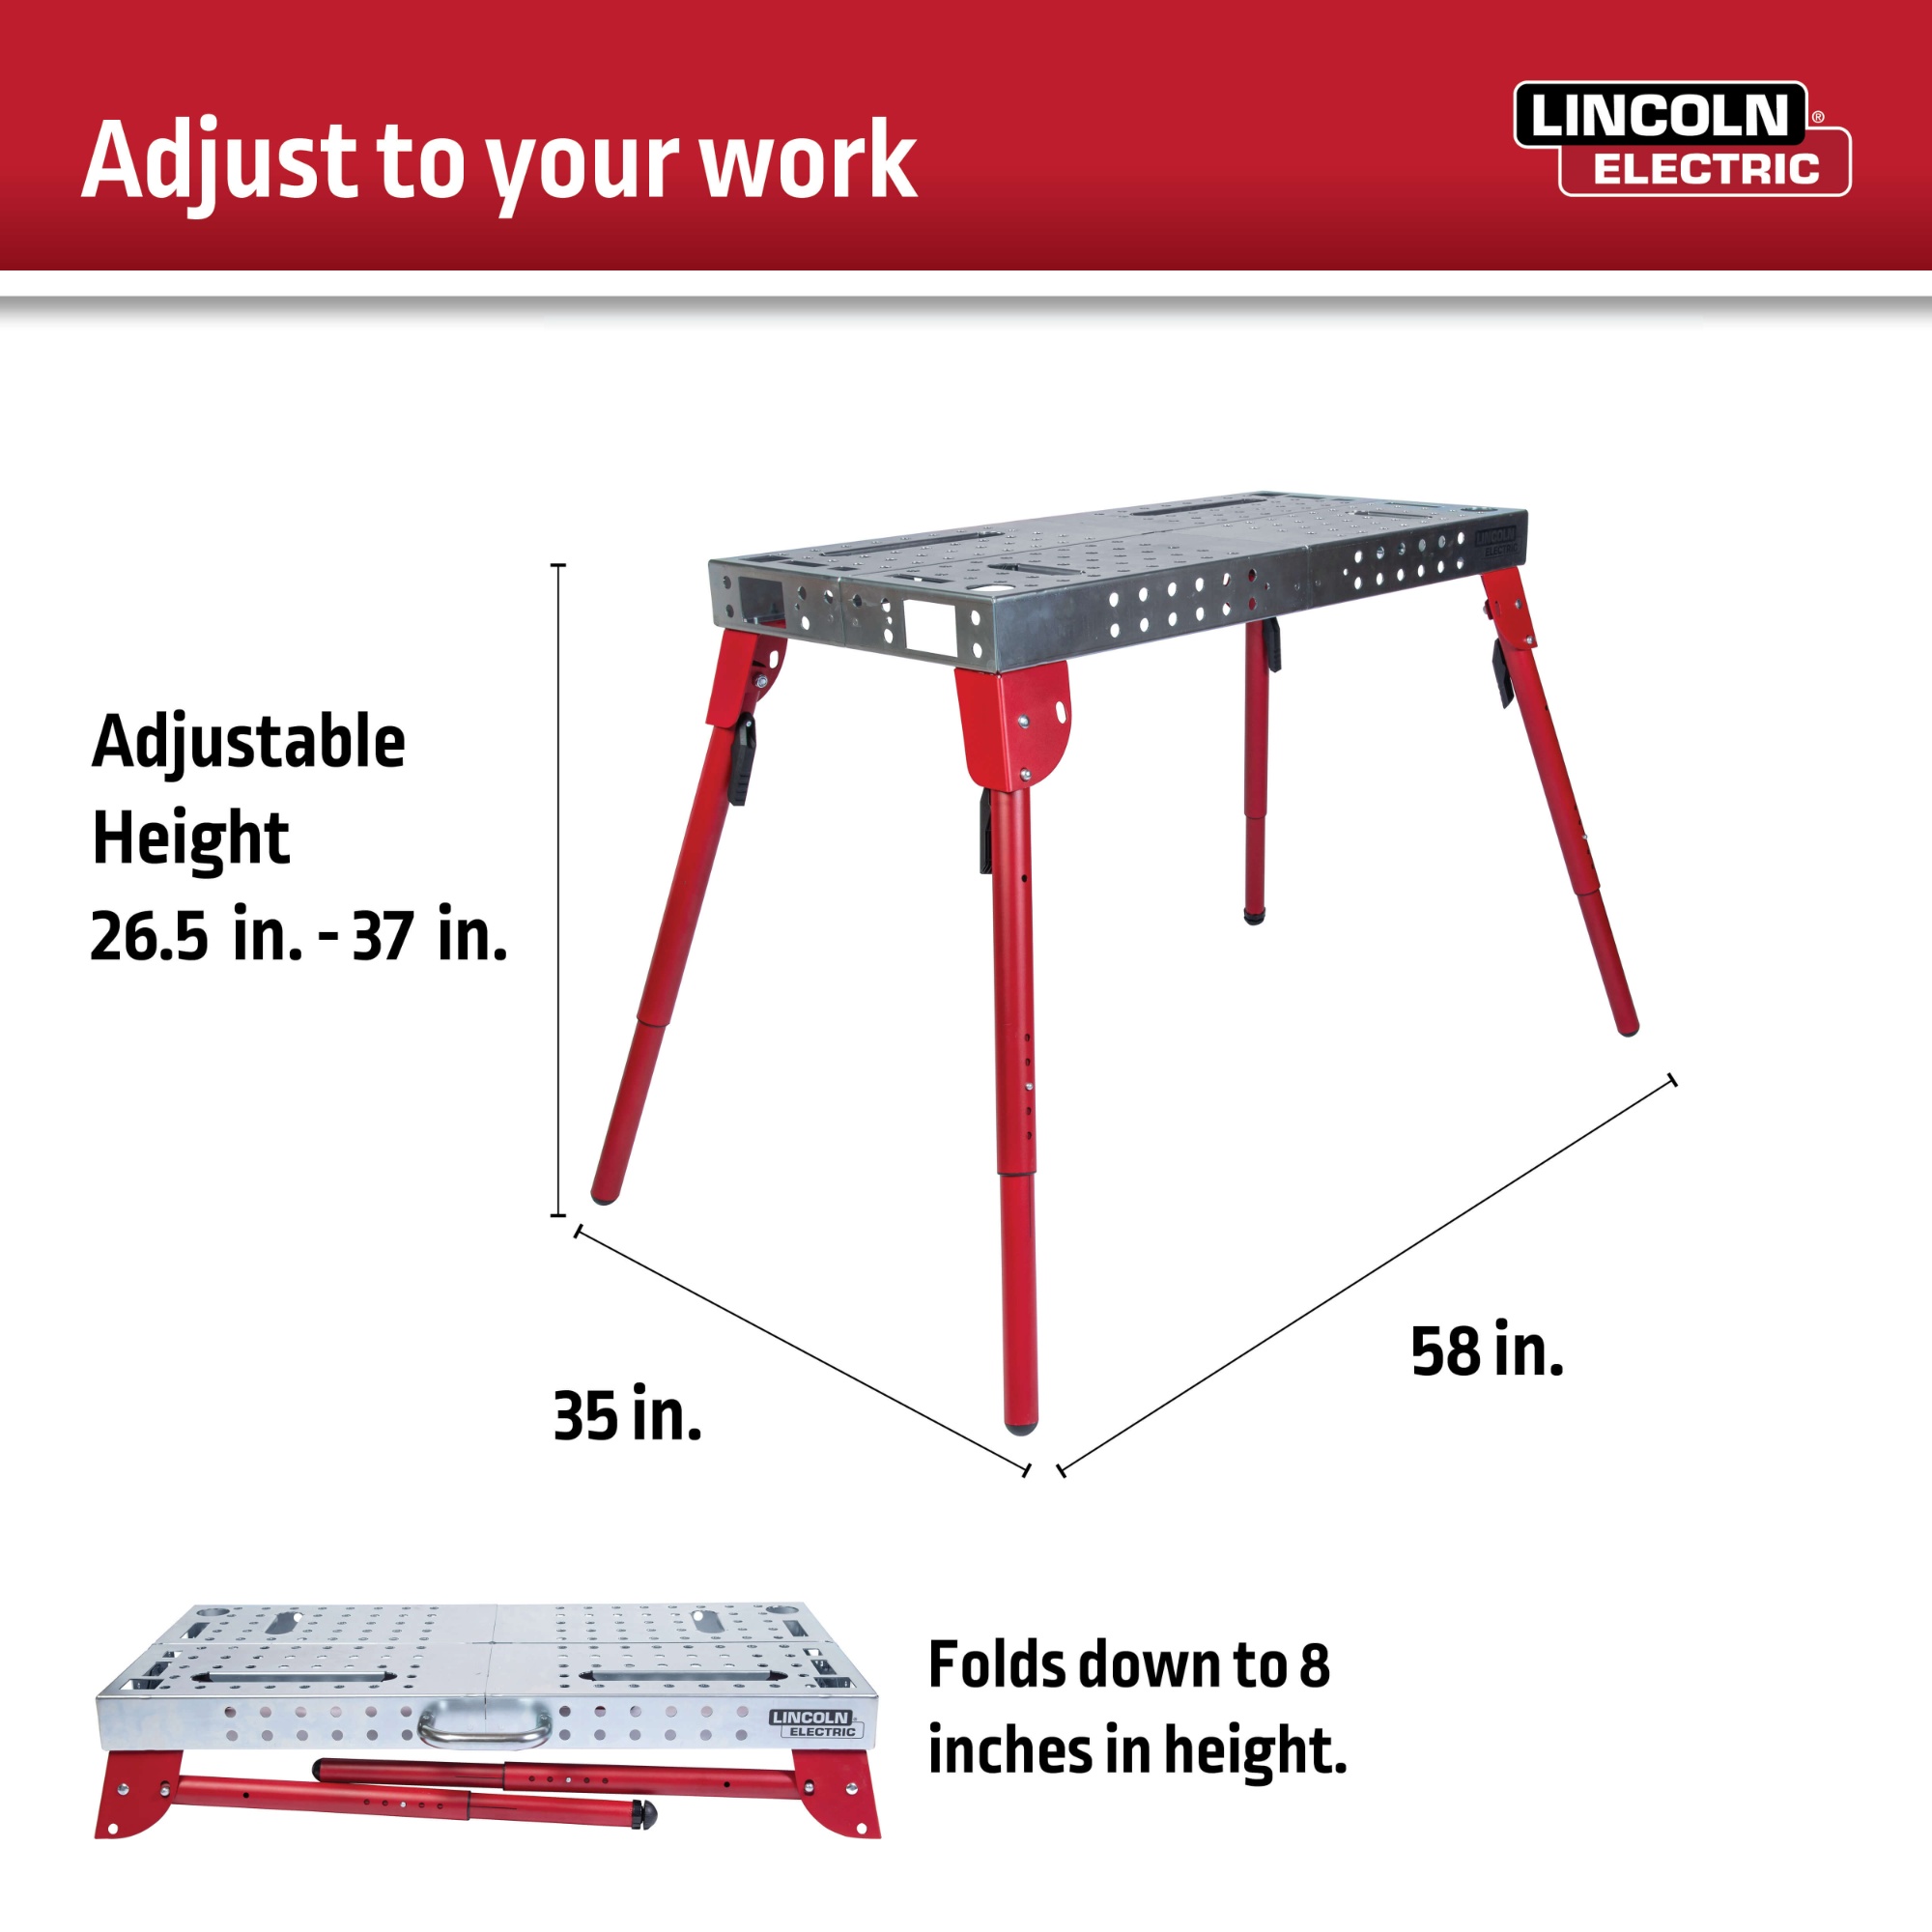 Lincoln Electric Portable Welding Table and Workbench #K5334-1 - Adjustable dimensions